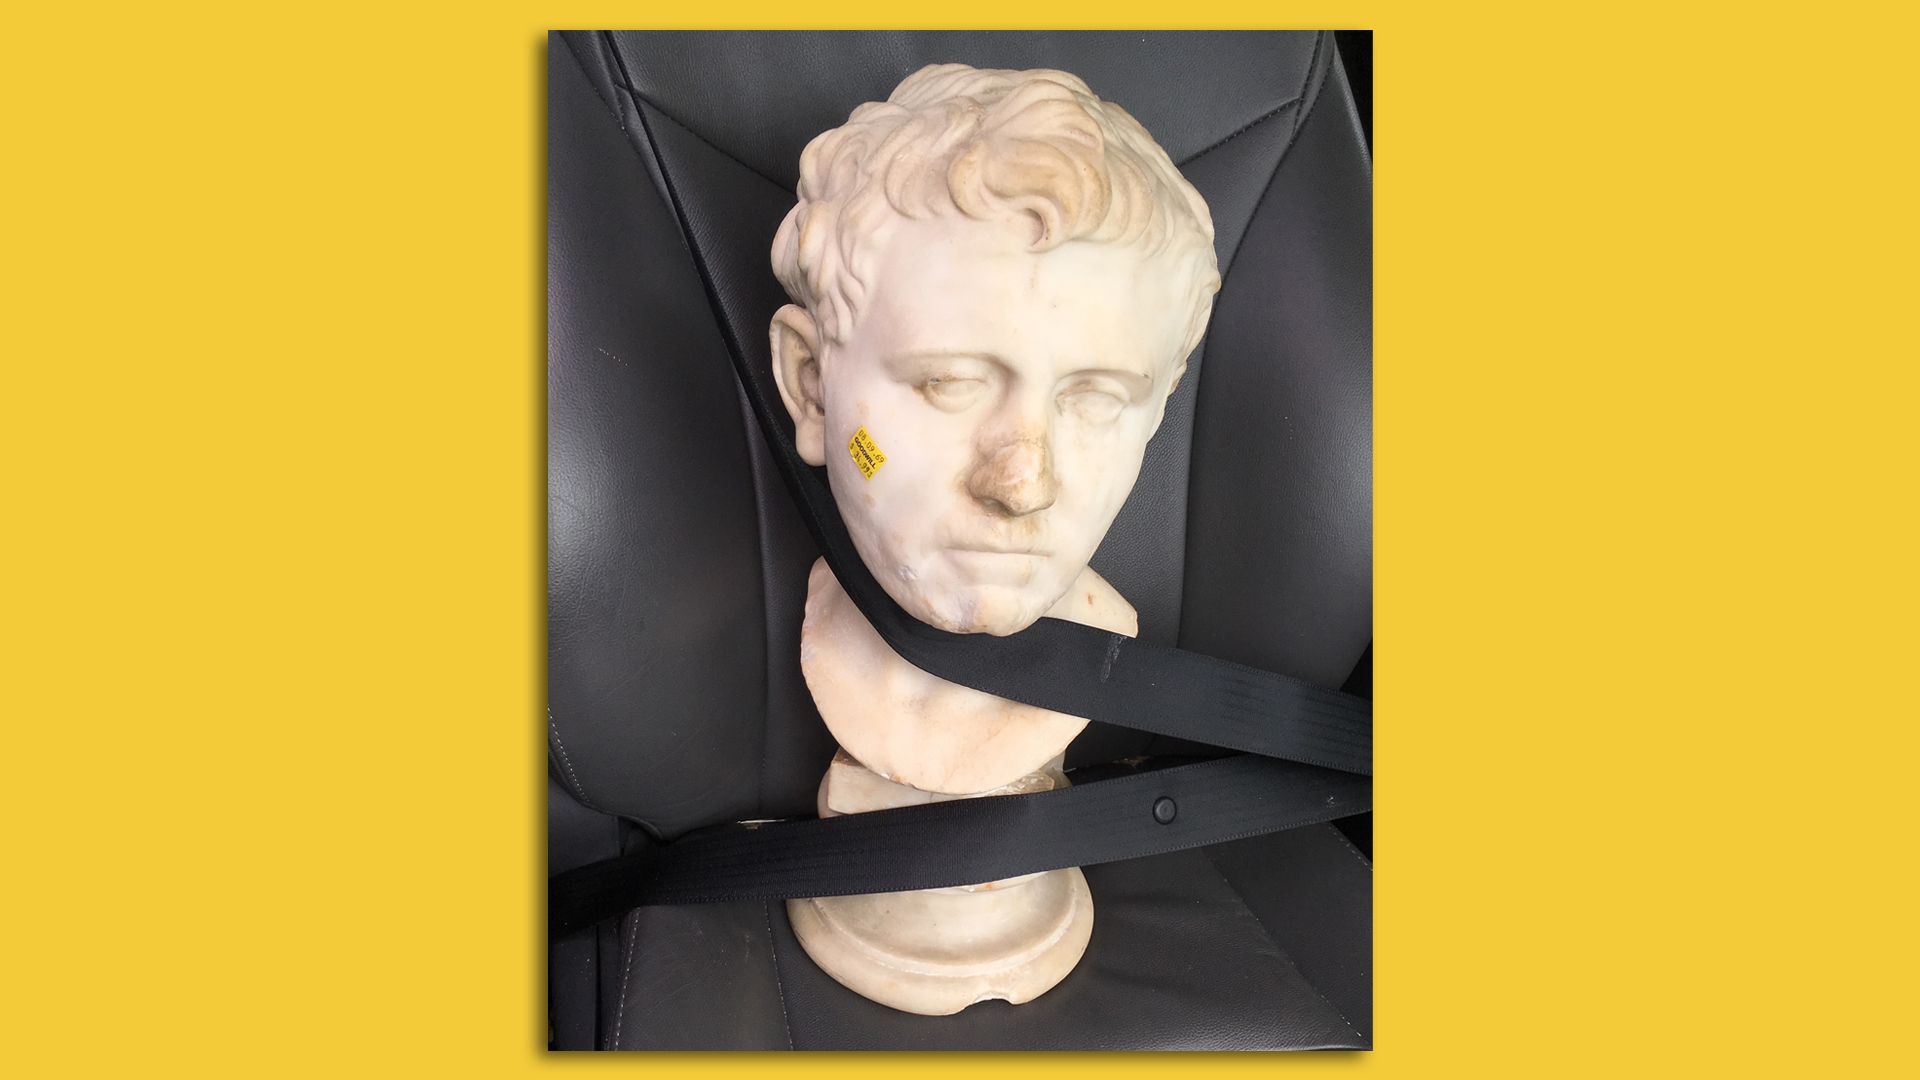 Sculpture buckled into a car seat.